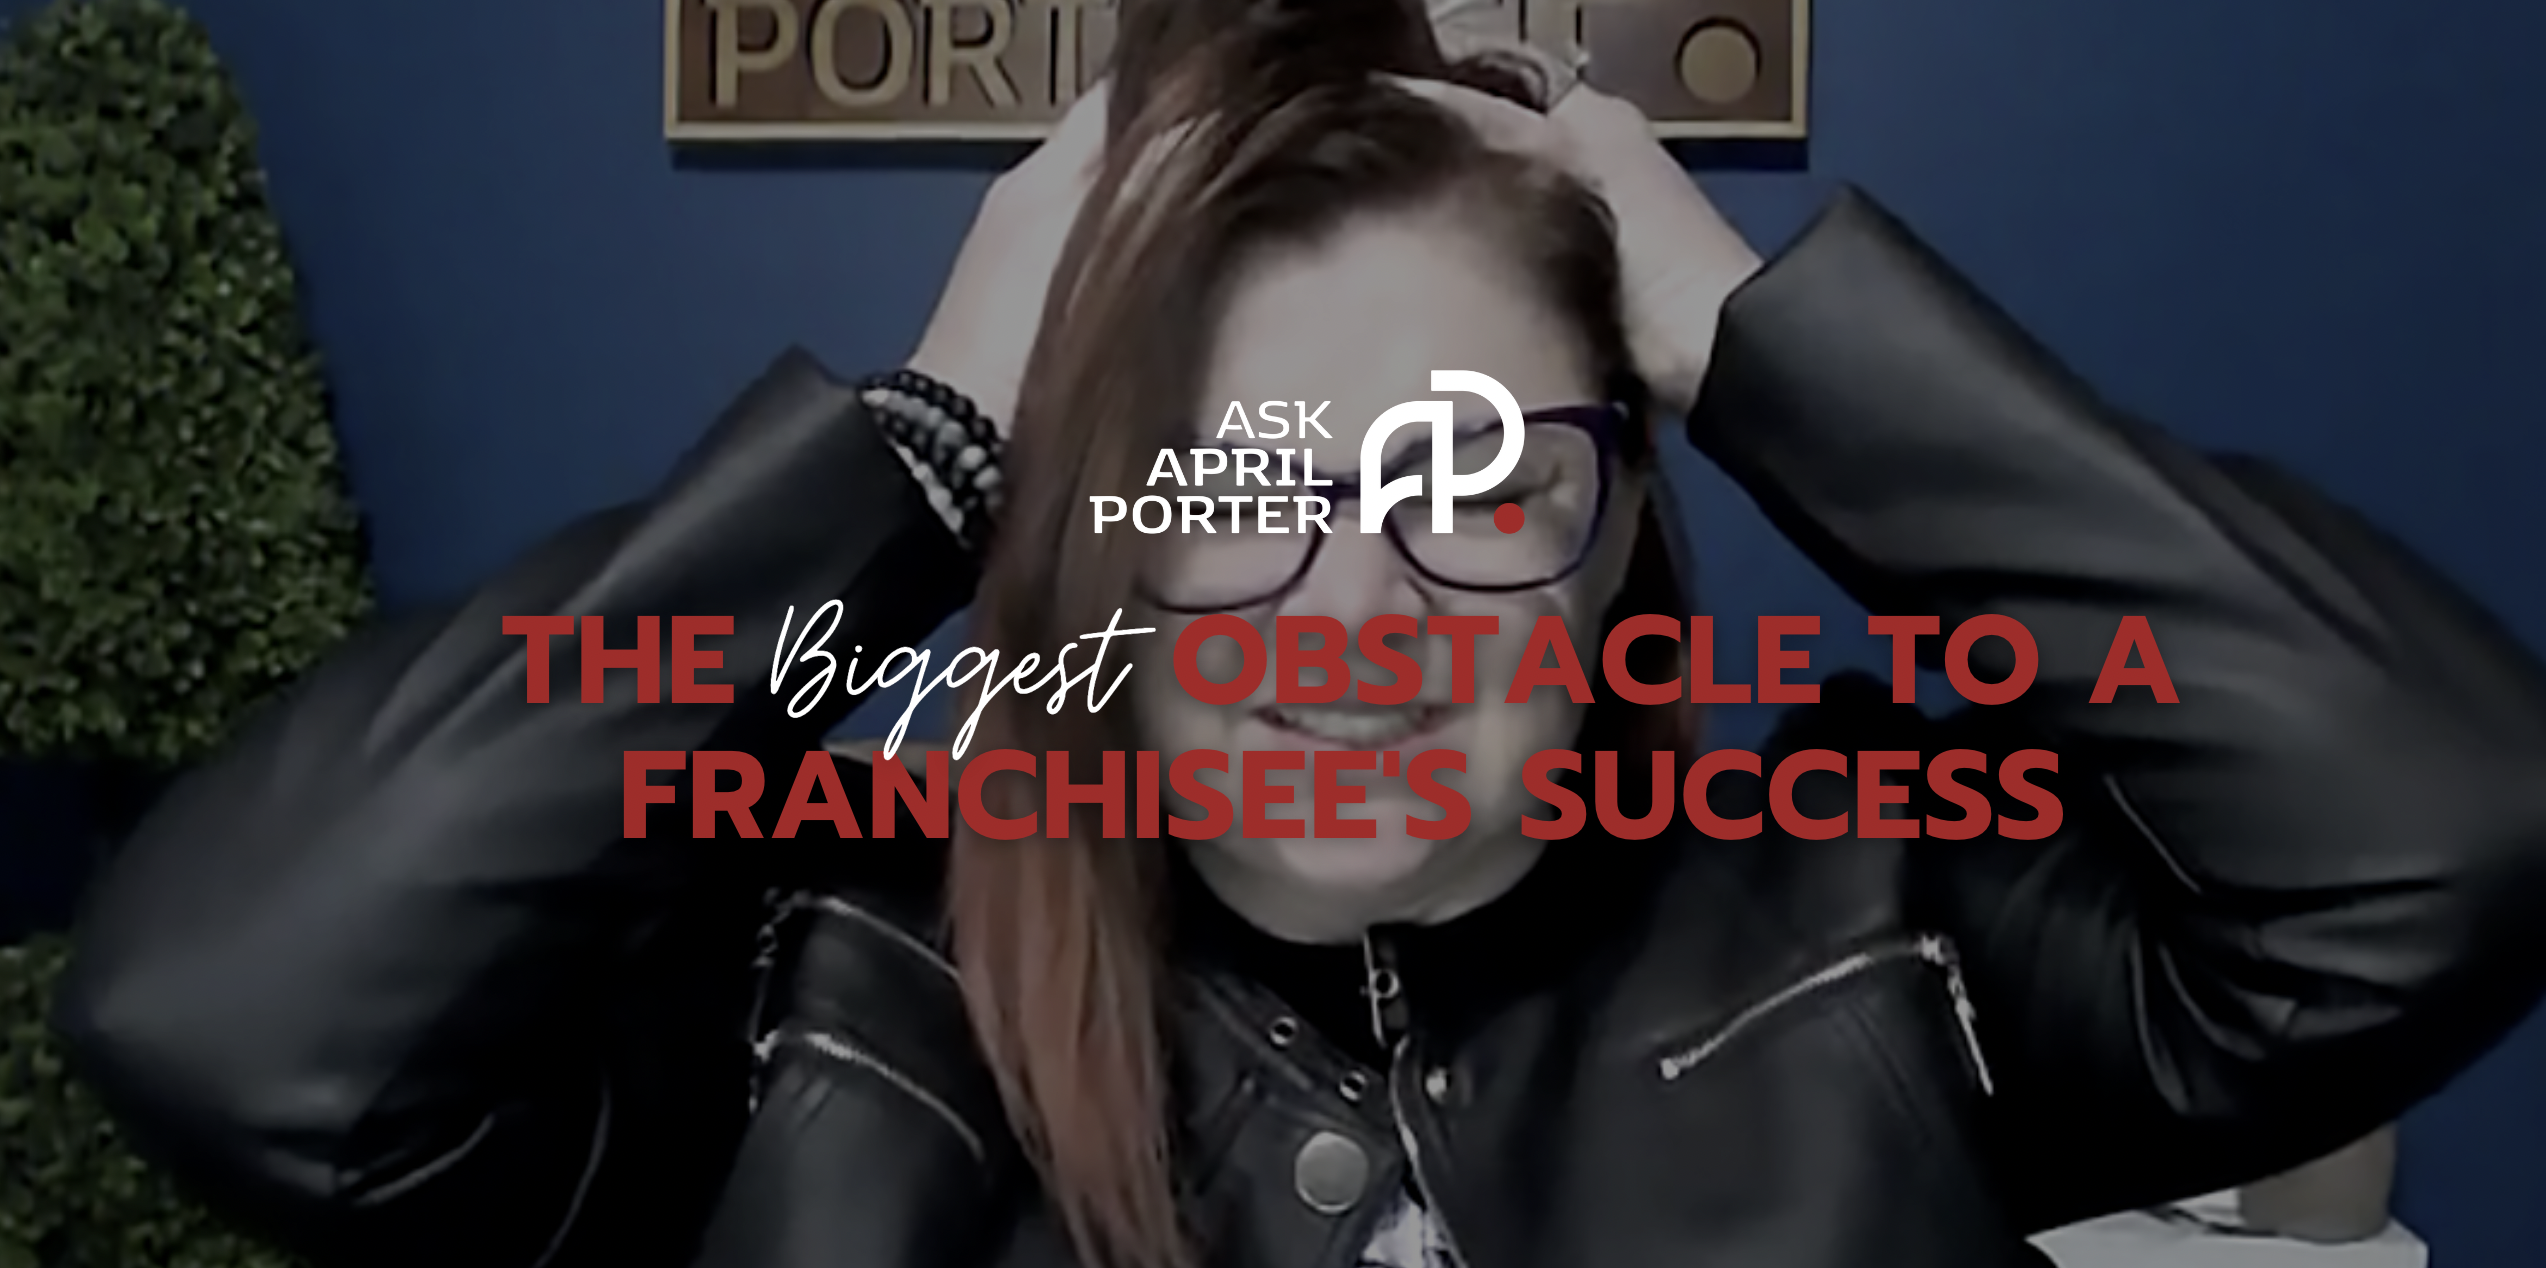 The Biggest Obstacle to a Franchisee's Success